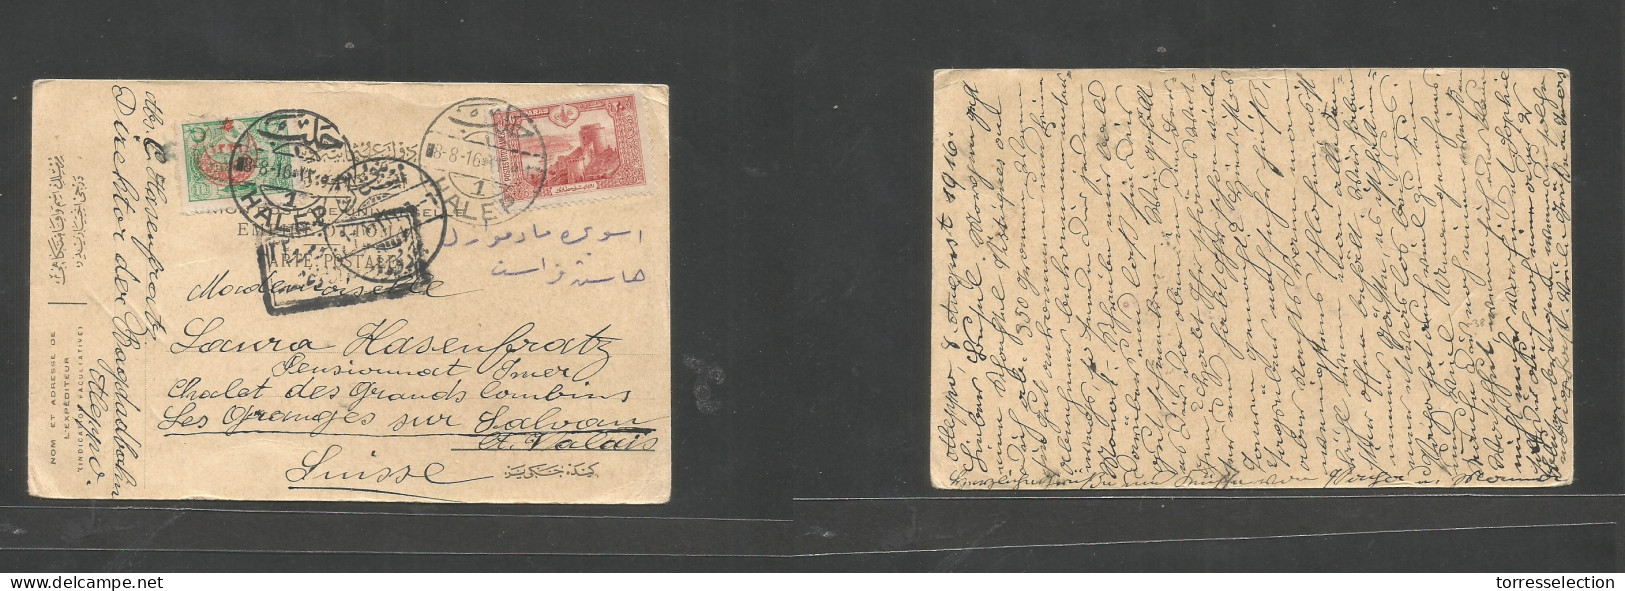 SYRIA. 1916 (8 Aug) Turkish Admin, Halep - Switzerland, Lausanne. Multifkd Private Card At 20p Rate, Tied Bilingual Cds  - Siria